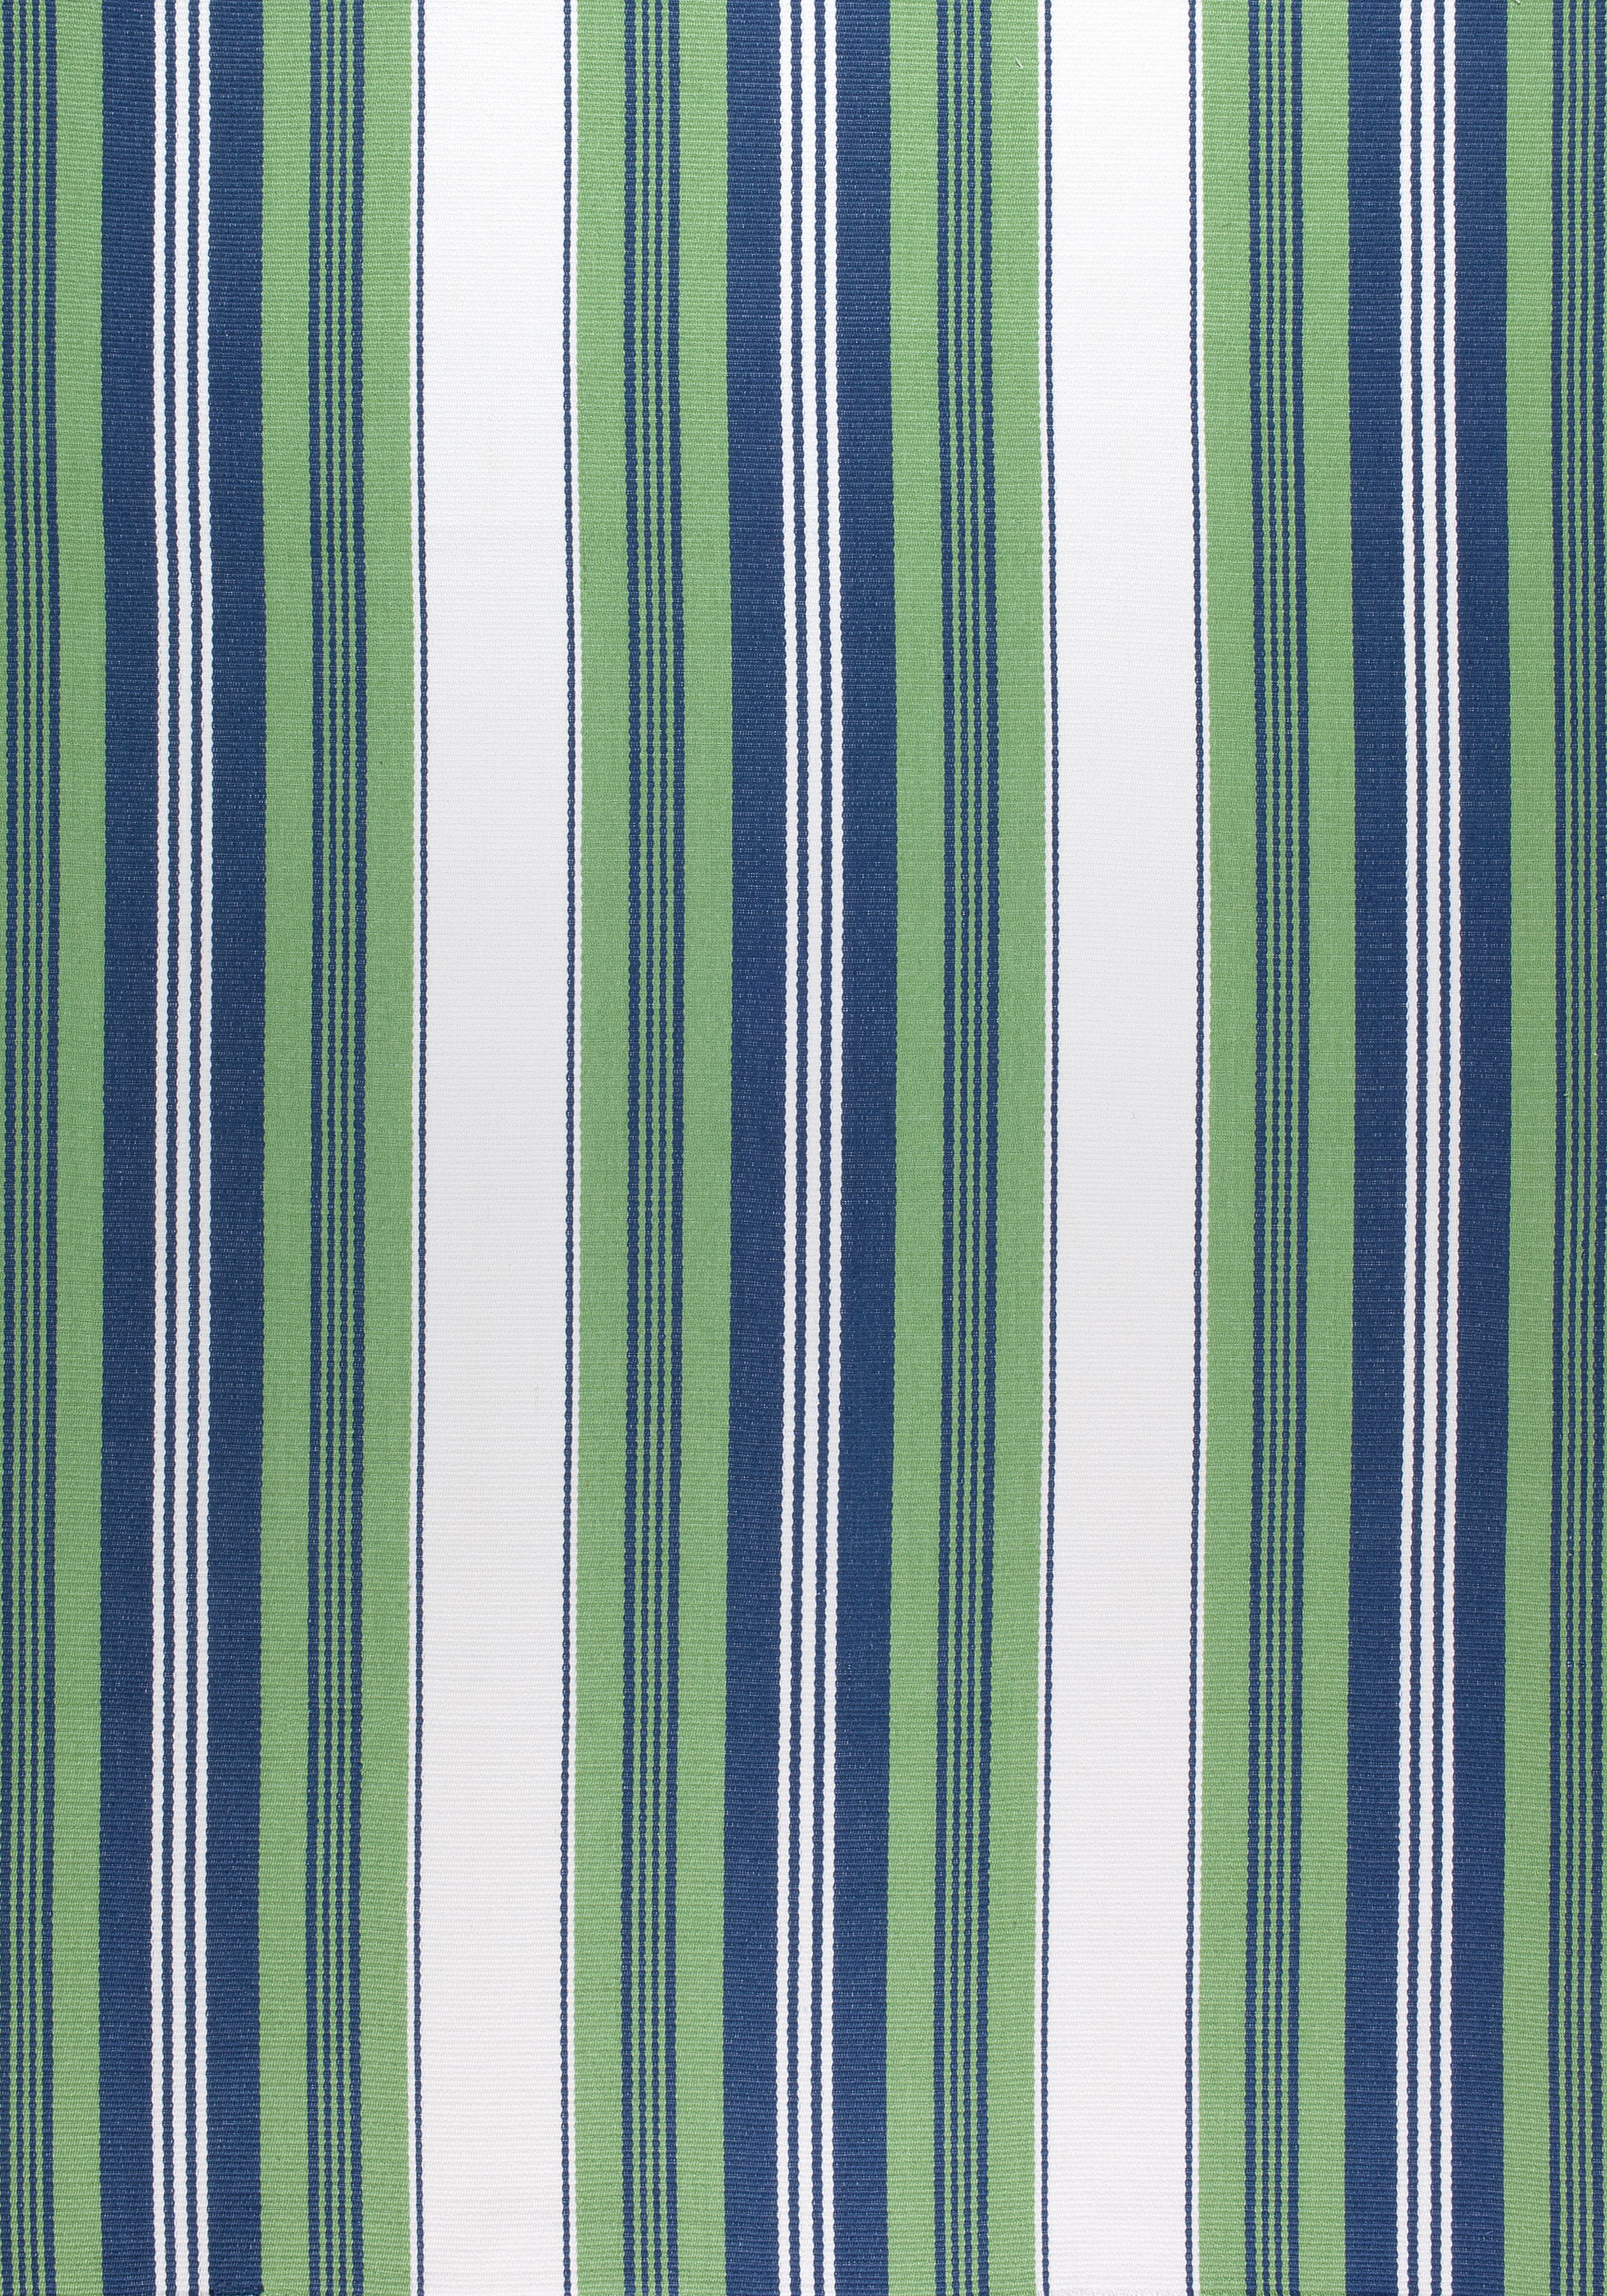 SHERIDAN STRIPE Blue and Green W80071 Collection Woven 9